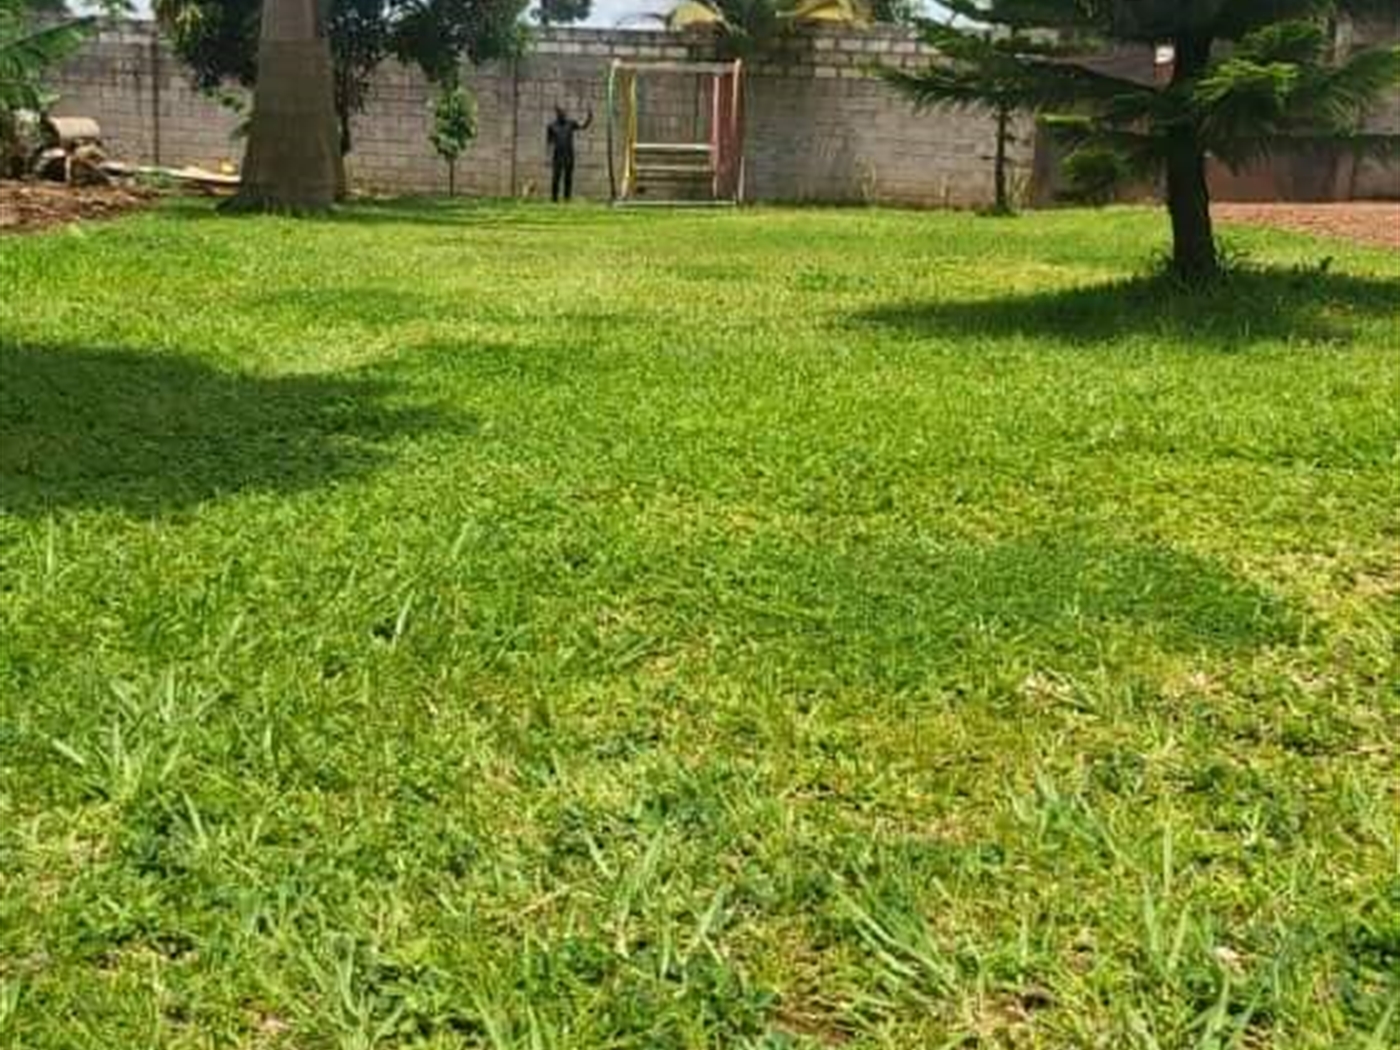 Storeyed house for sale in Lubaga Kampala